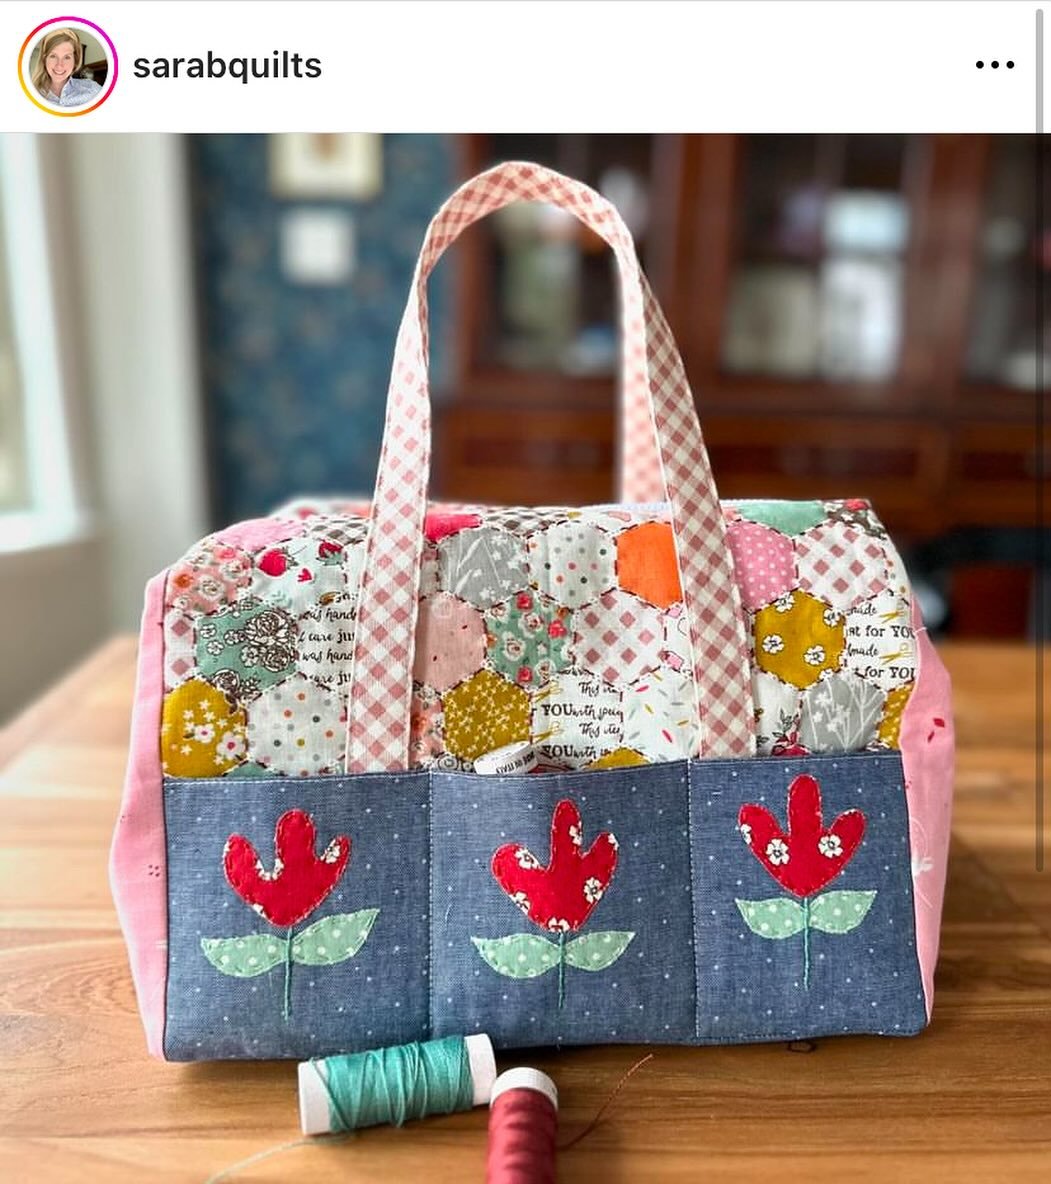 Happy Friday friends!!
How beautiful is this #stylishsewingtote from @sarabquilts 🌷😍🌷😍🌷
Find our newest kits at the link in our profile and head over to @sarabquilts for more inspiration.
.
.
#zakkaworkshop #sewingkit #sewingbag #bagmaking #lear